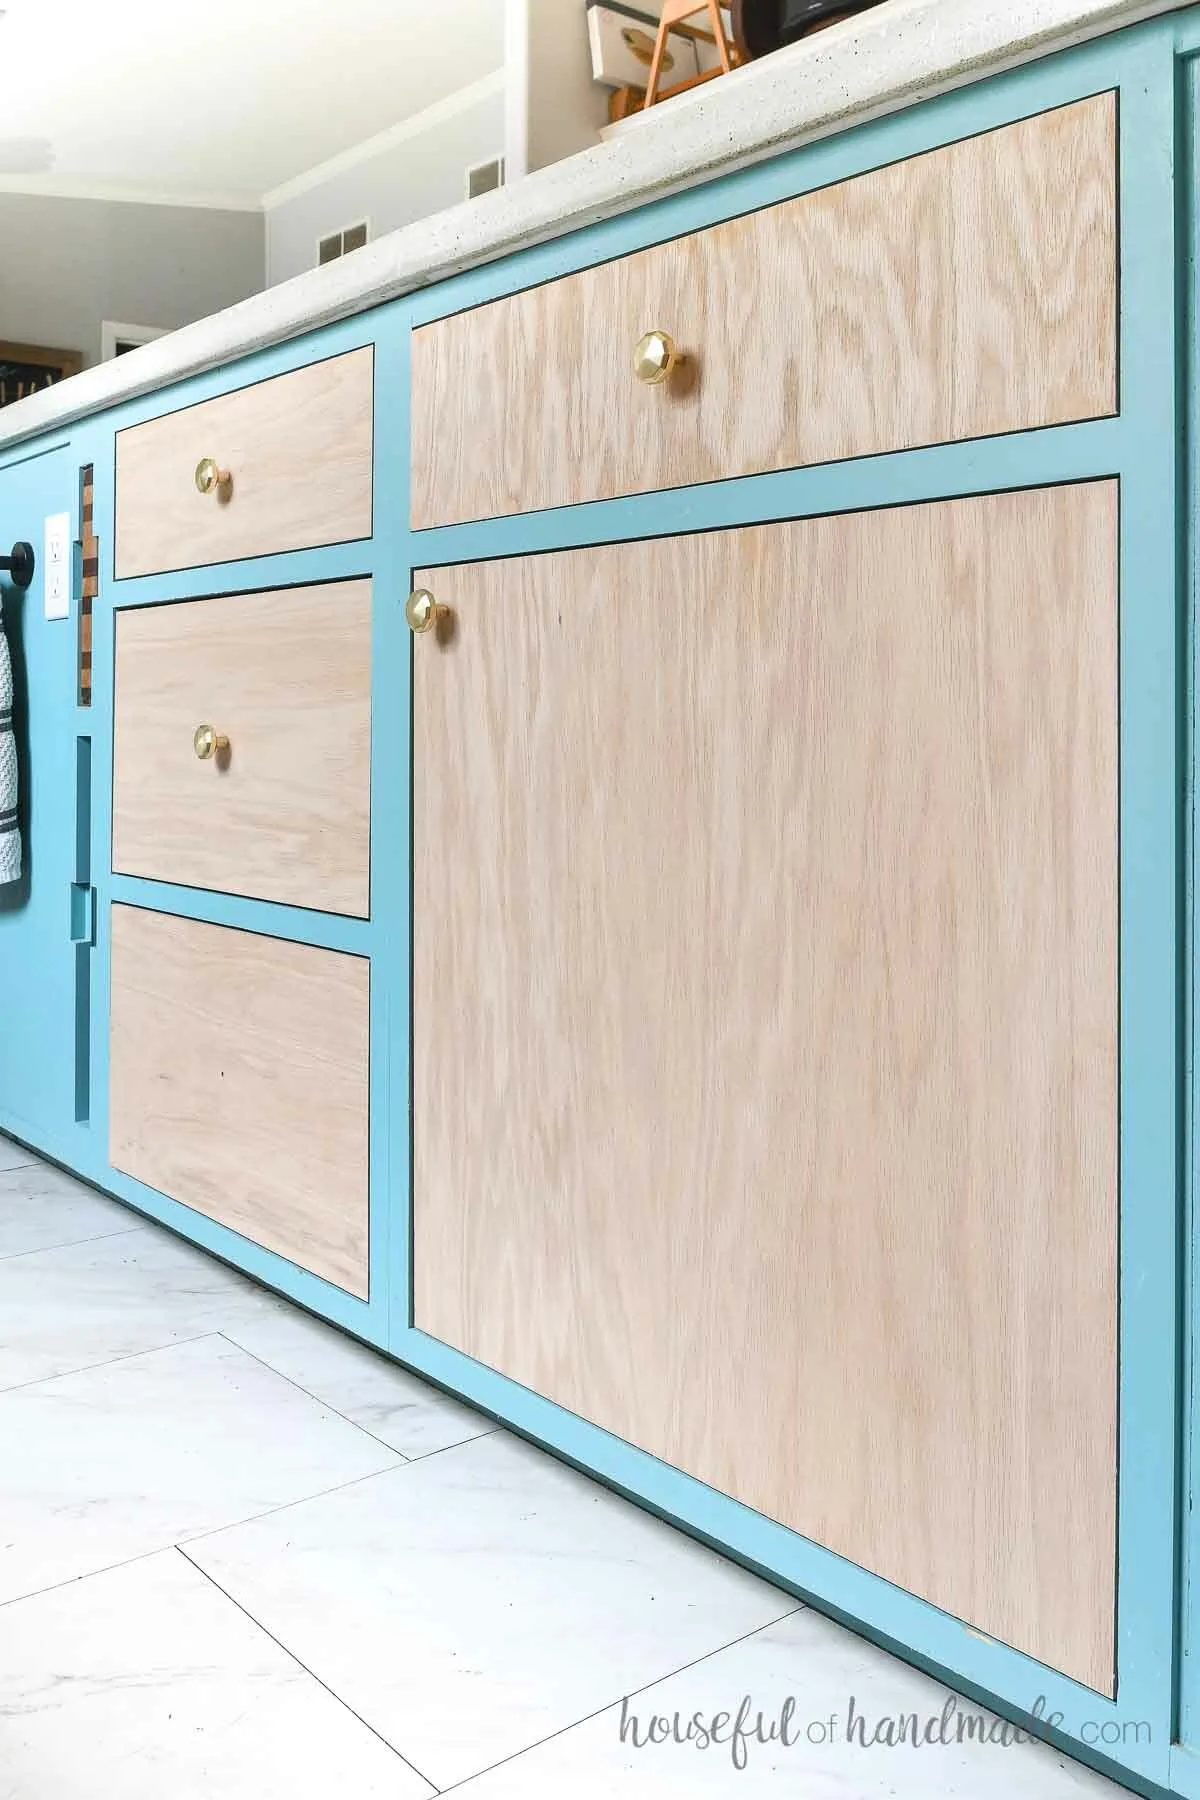 Teal painted kitchen island with inset plywood cabinet doors in oak.